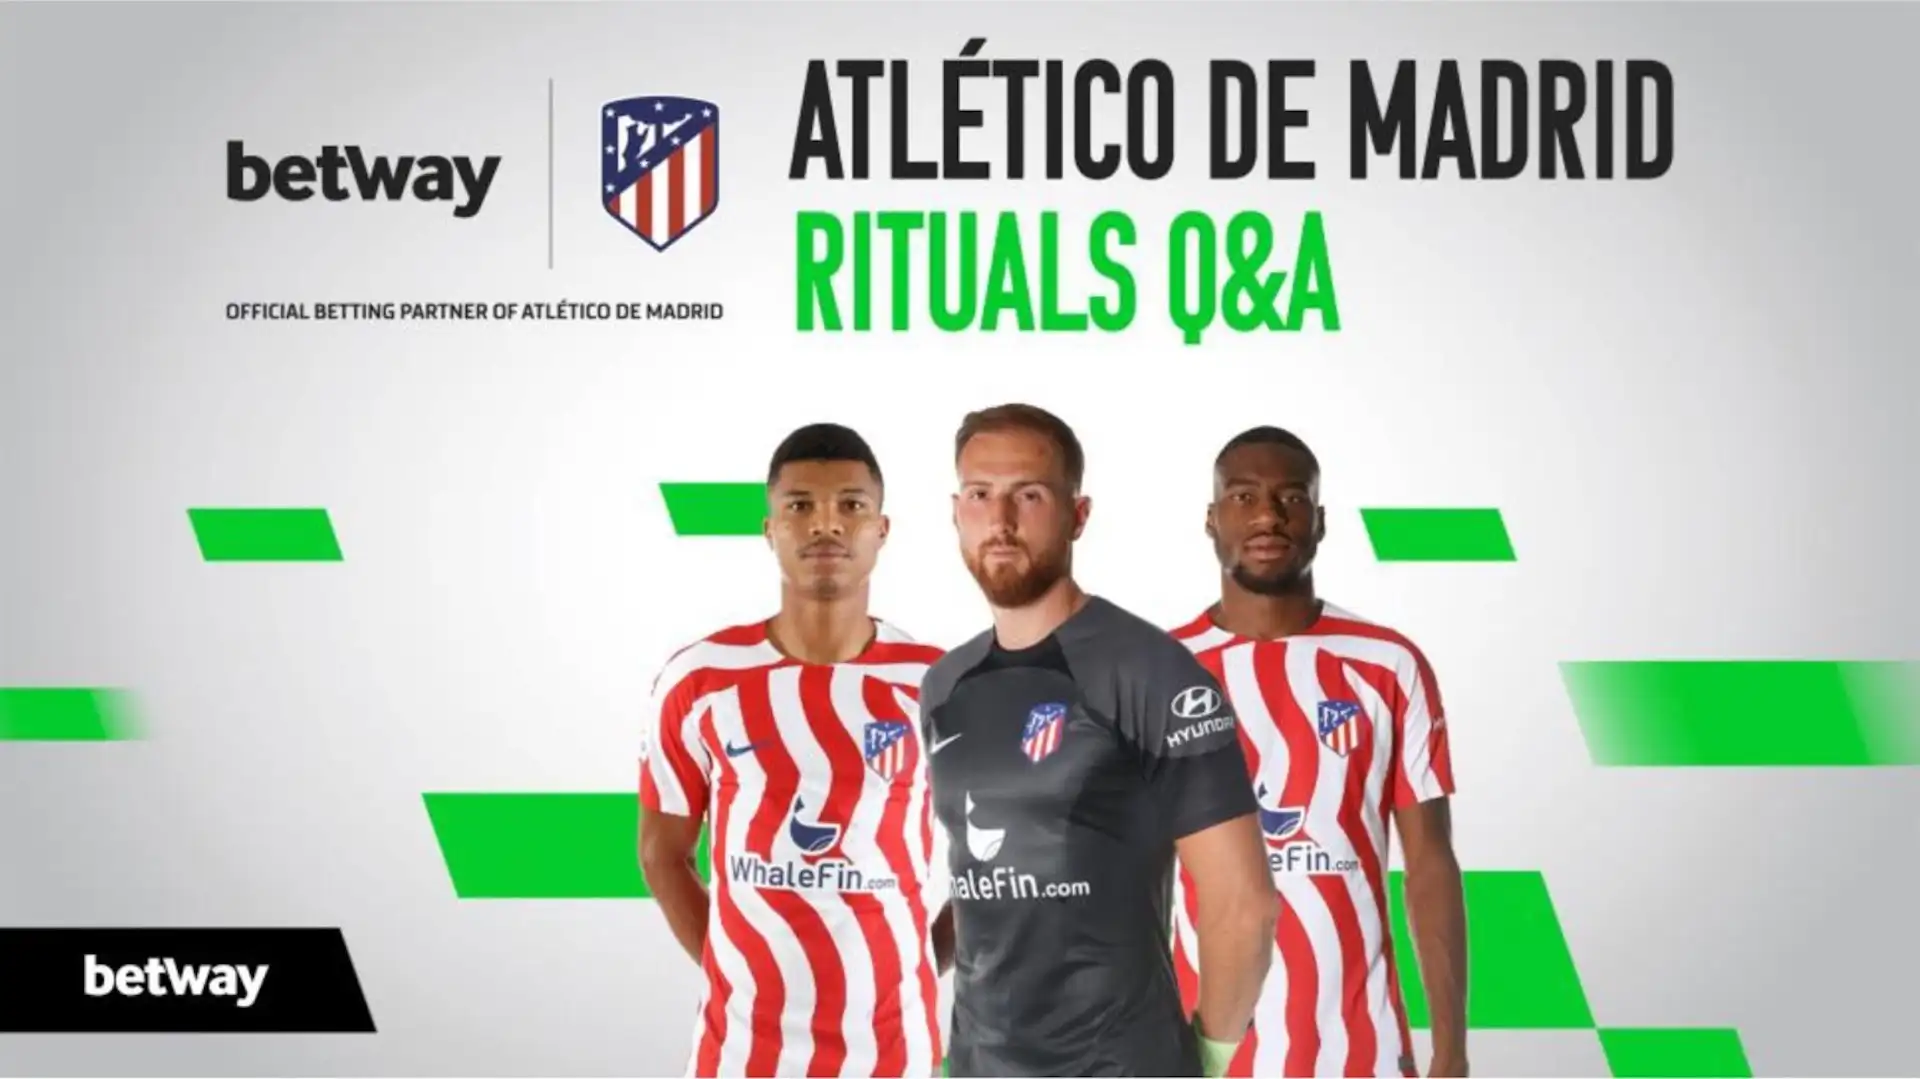 Getting to know three players from Atlético de Madrid in depth